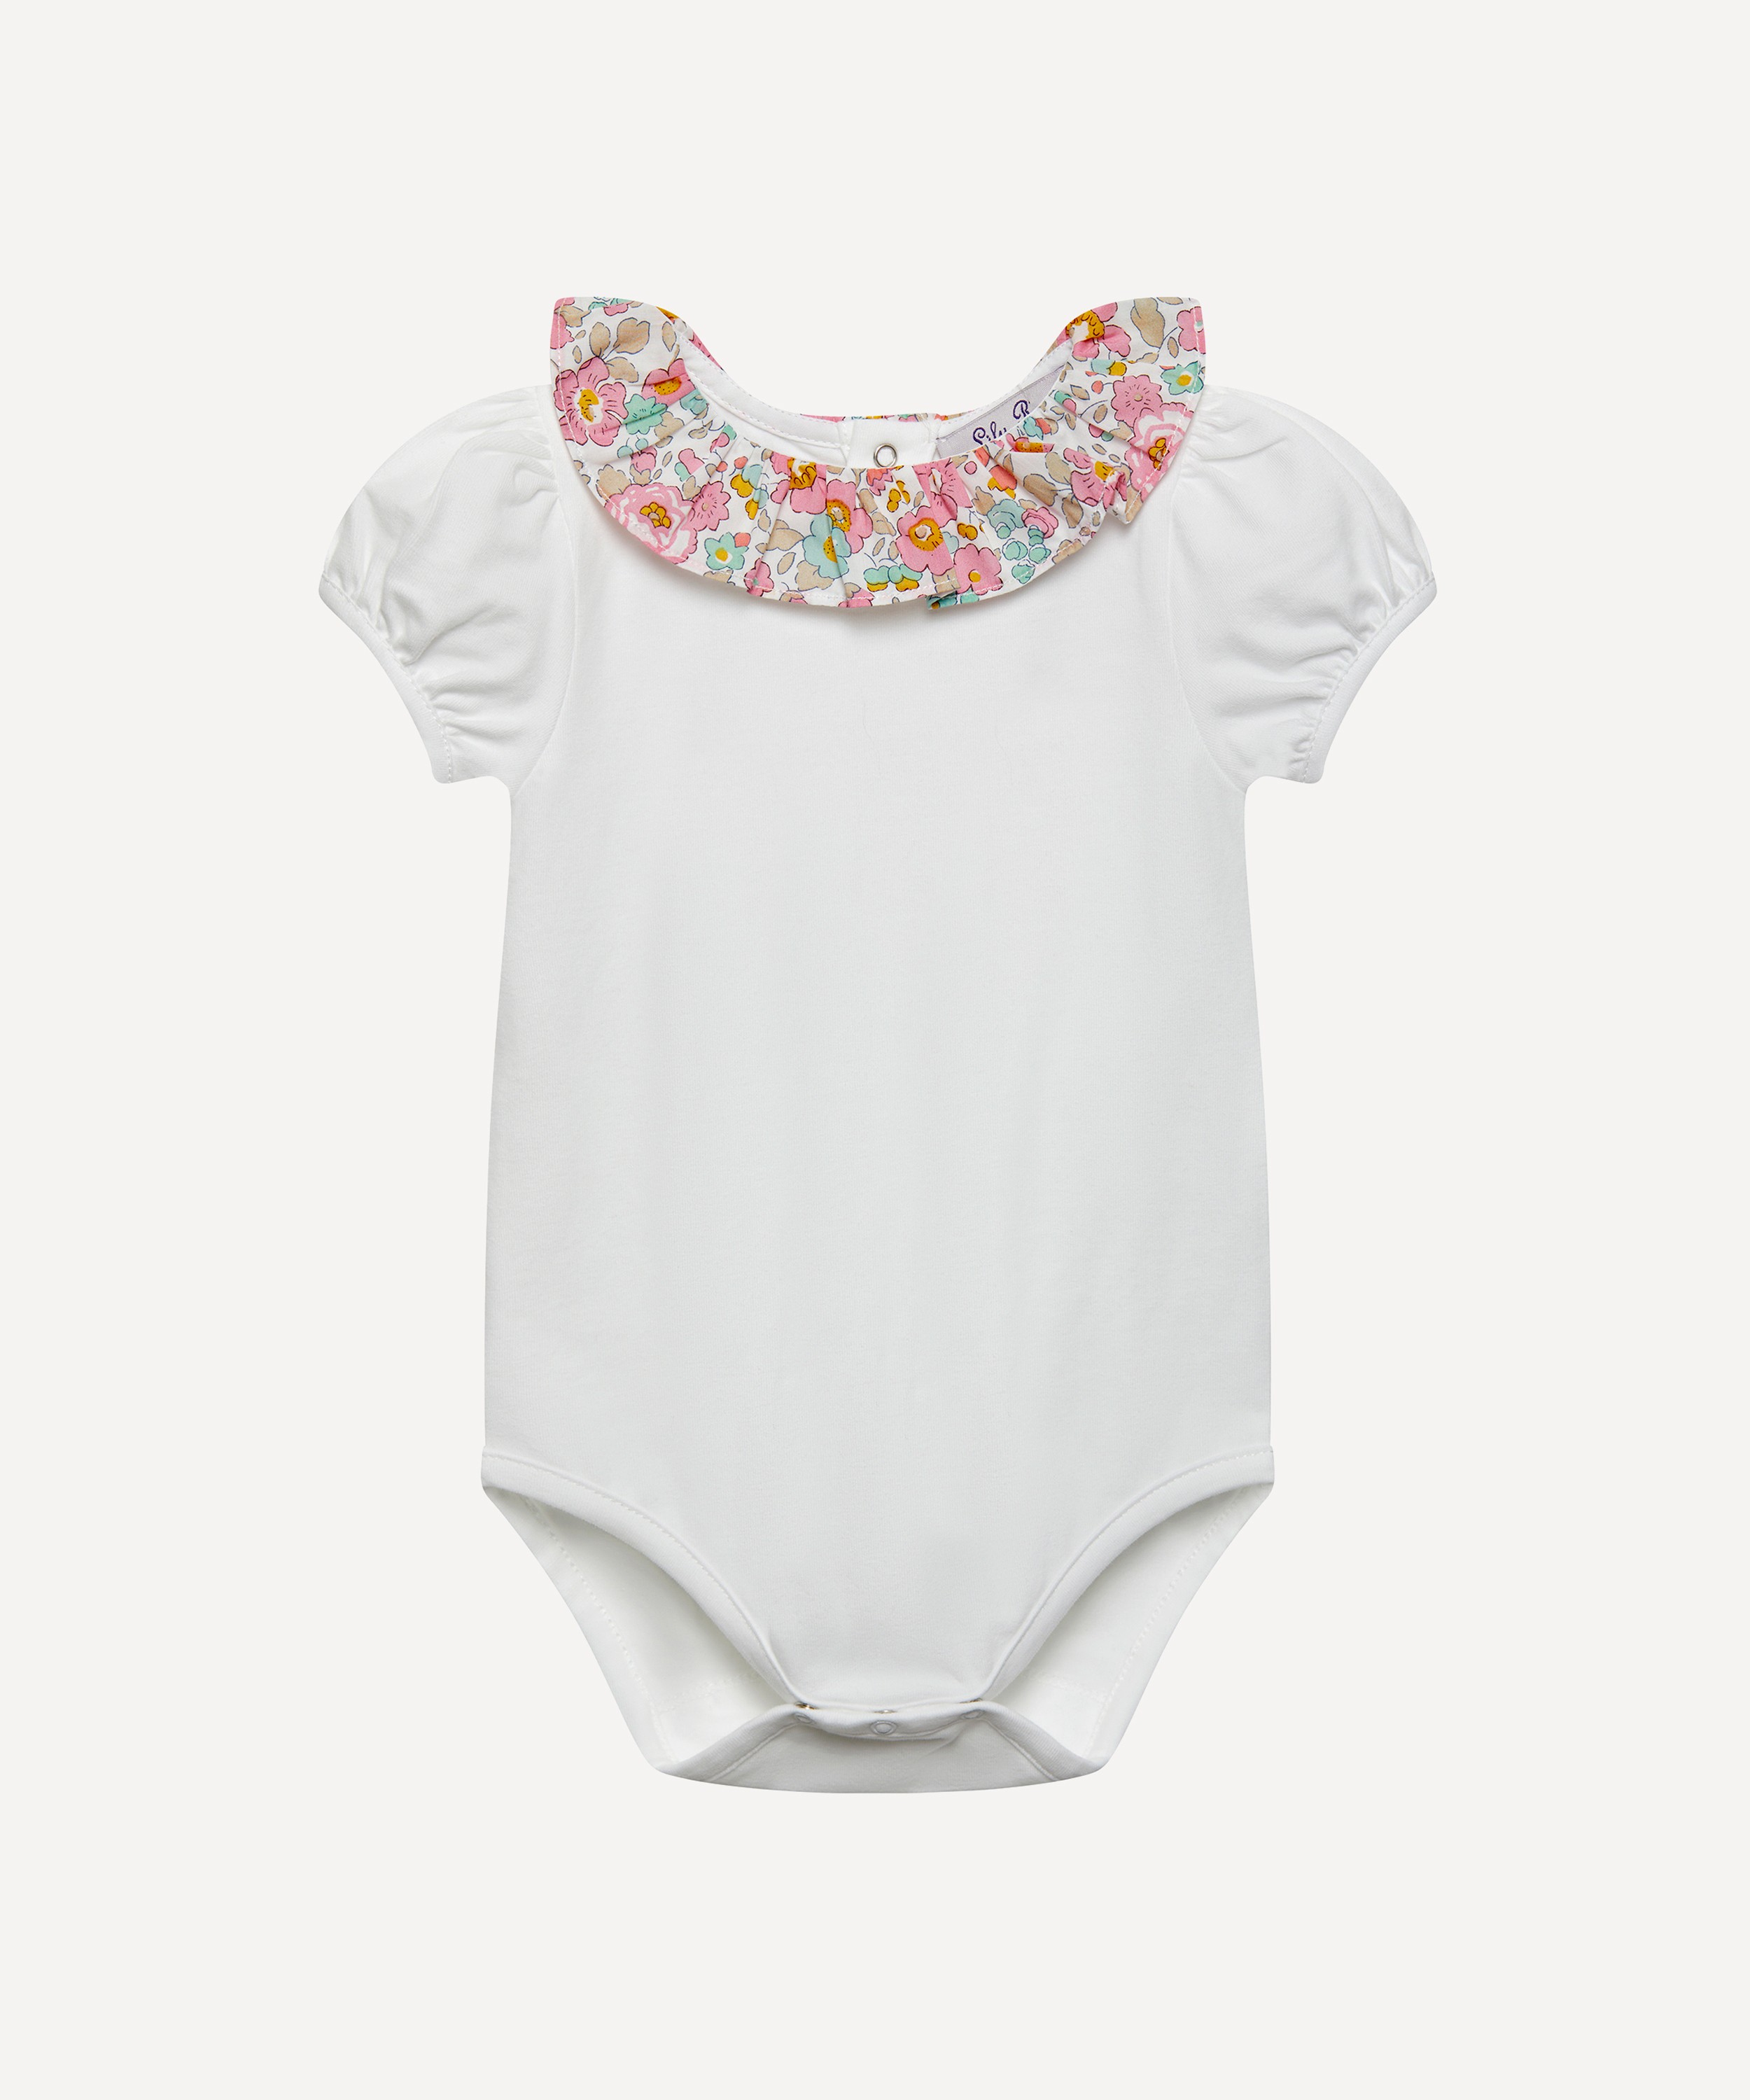 Trotters - Betsy Willow Bodysuit 3-24 Months